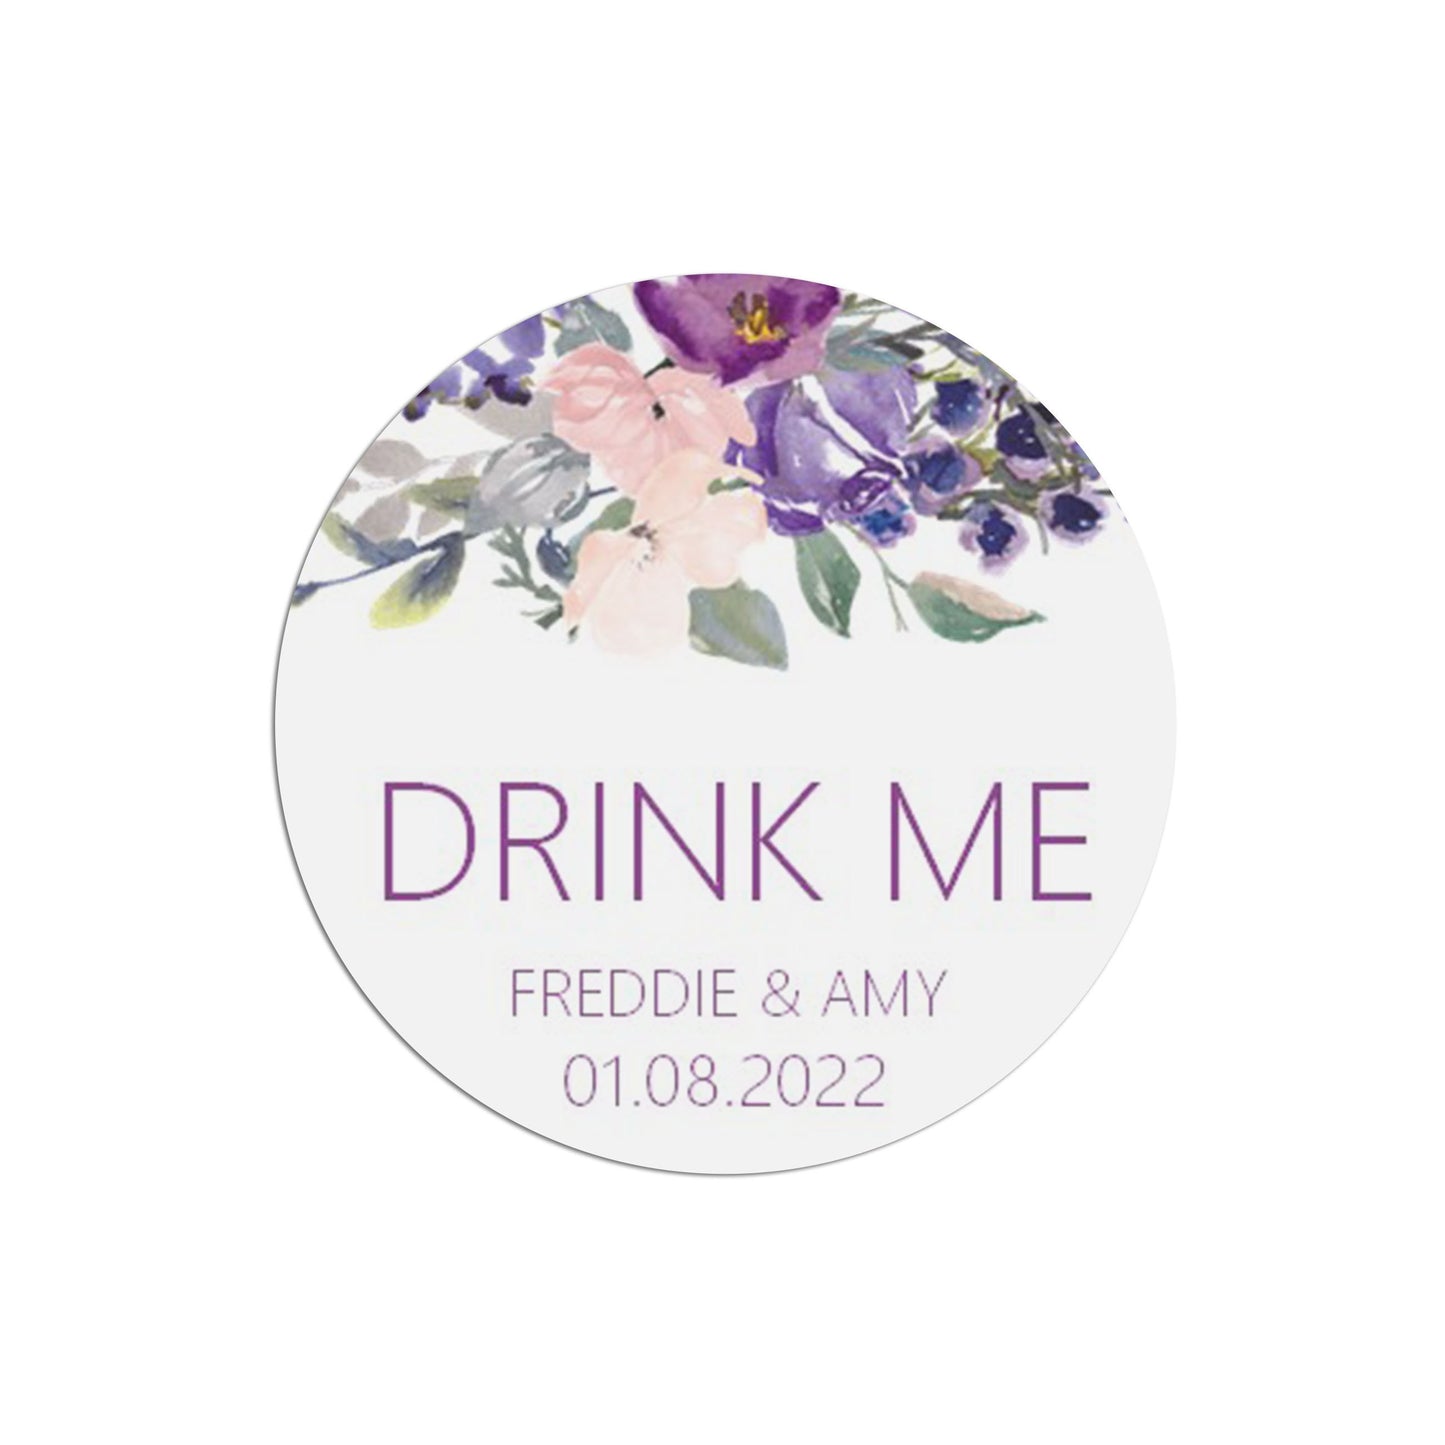 Drink Me Wedding Stickers, Purple Floral 37mm Round x 35 Stickers Per Sheet, Personalised At Bottom